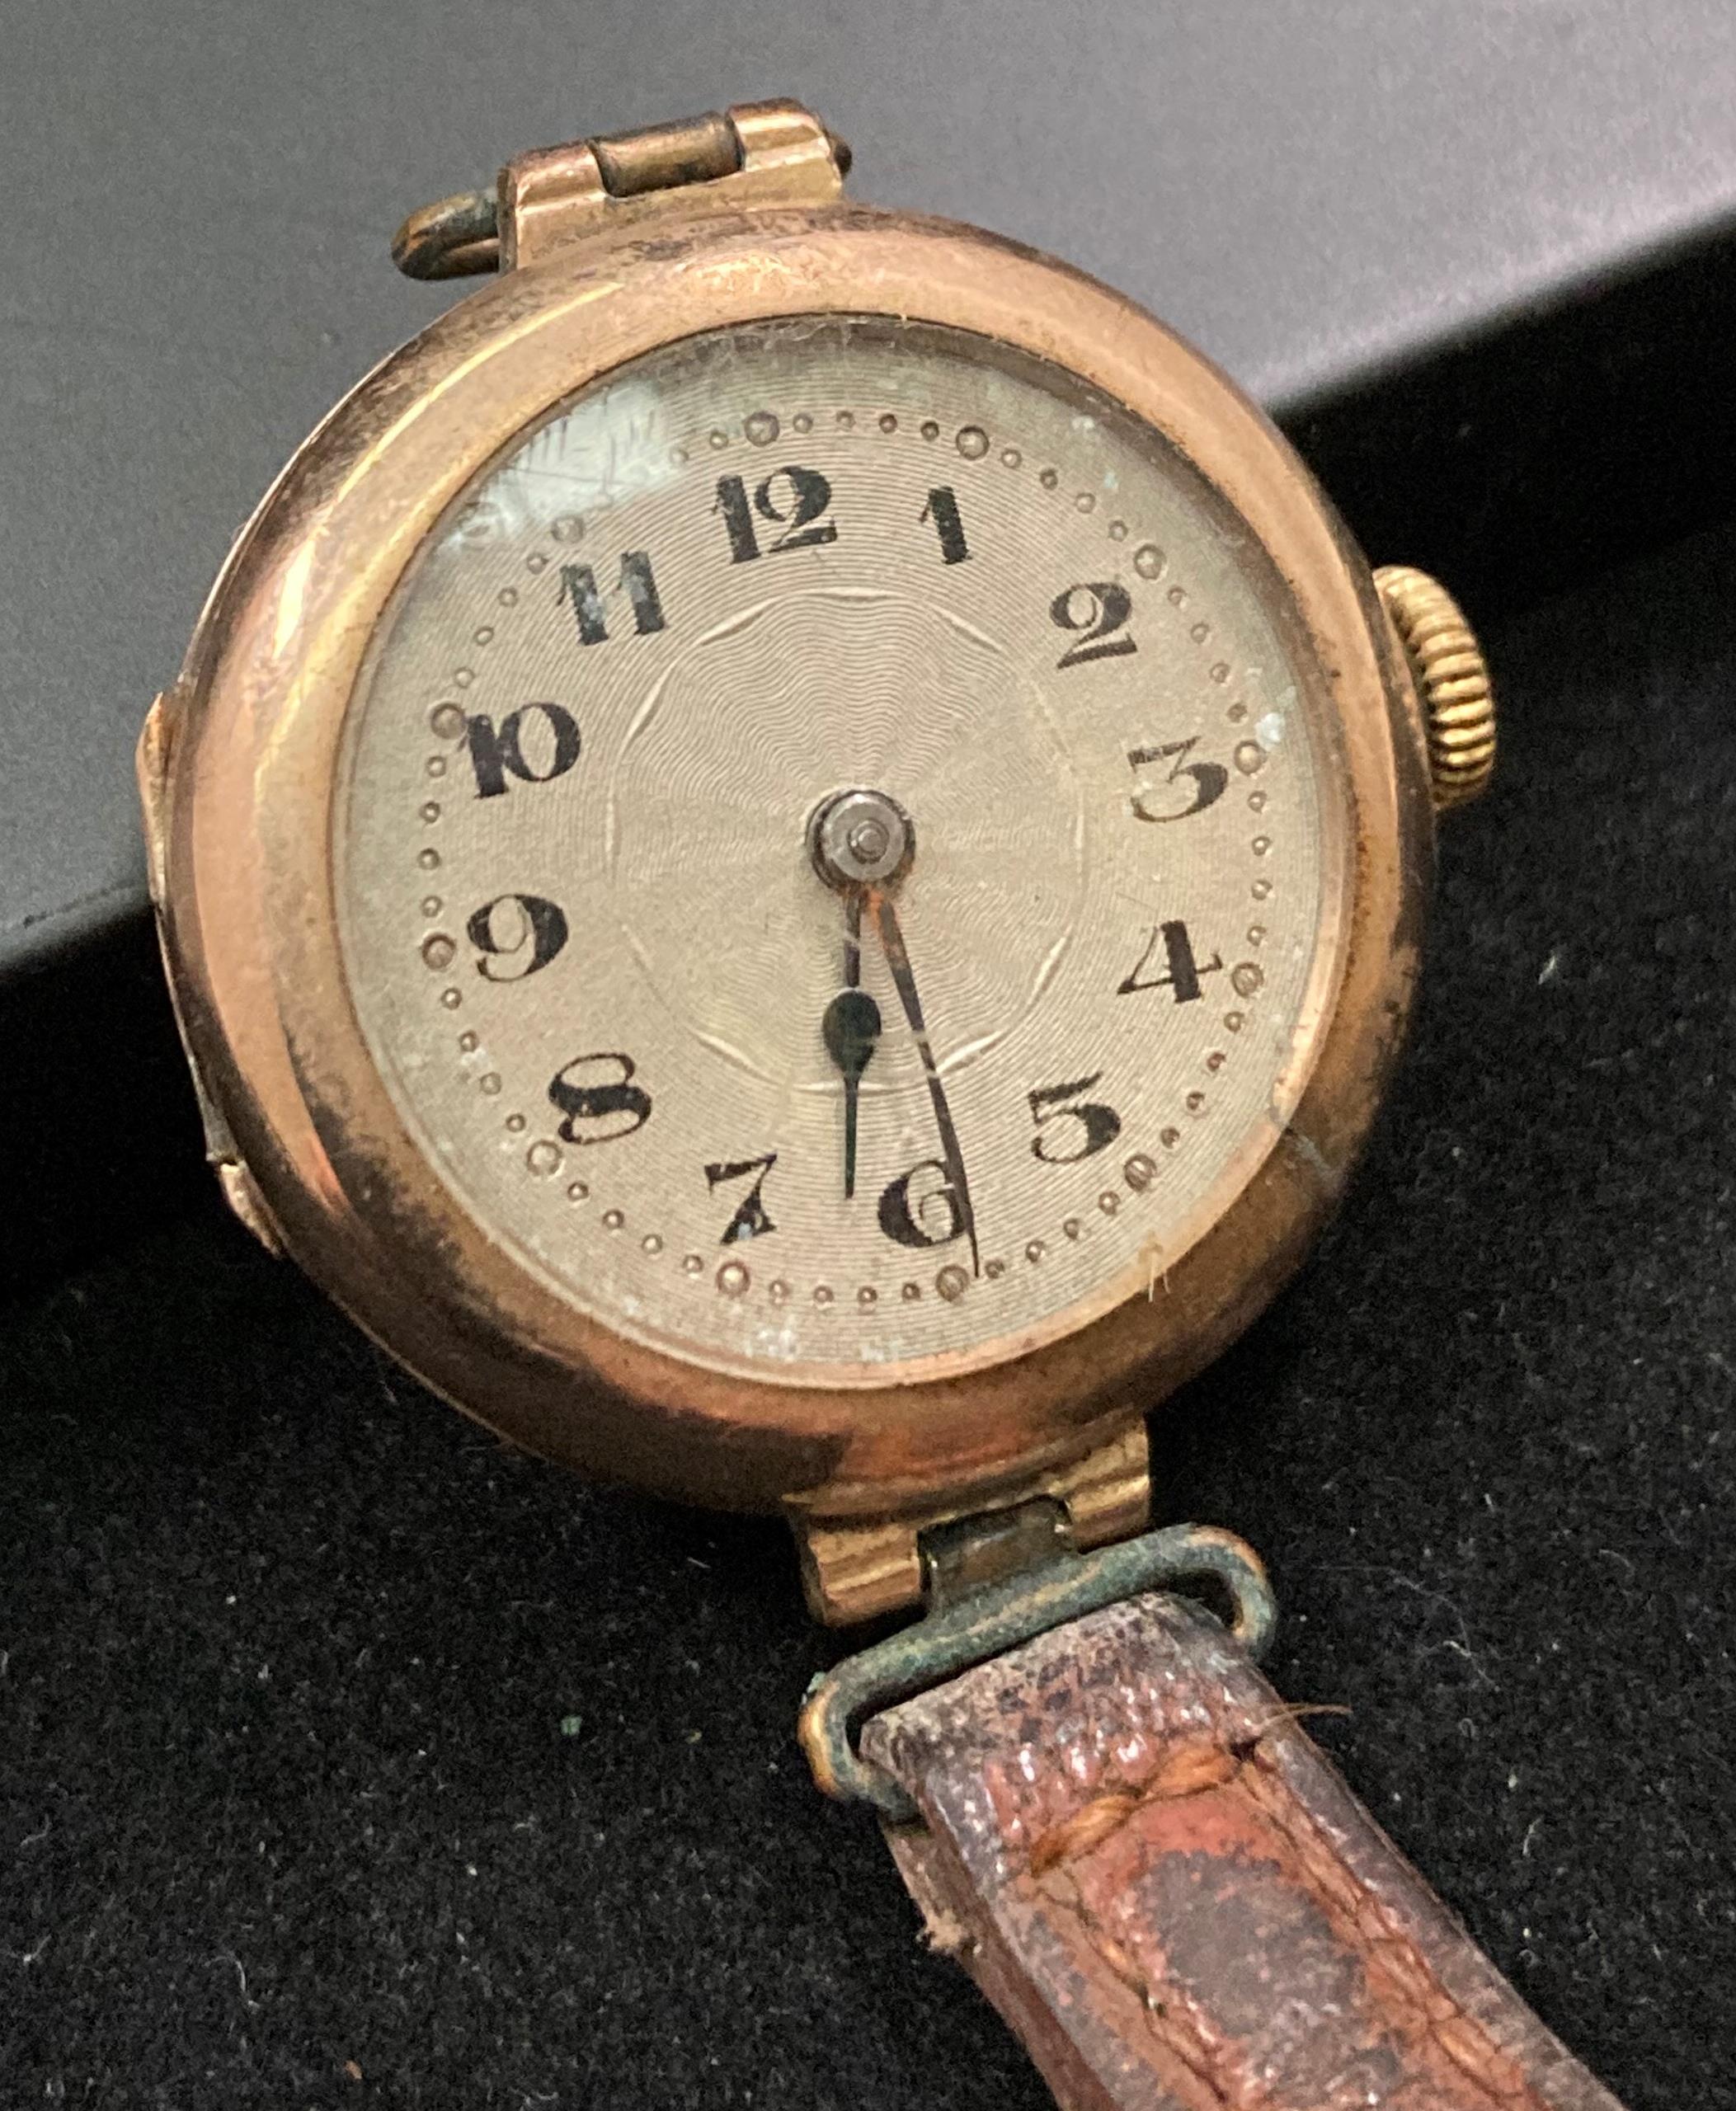 9ct gold 375 gold cased vintage wristwatch with Omega engraved on movement, no stamp, - Image 6 of 9